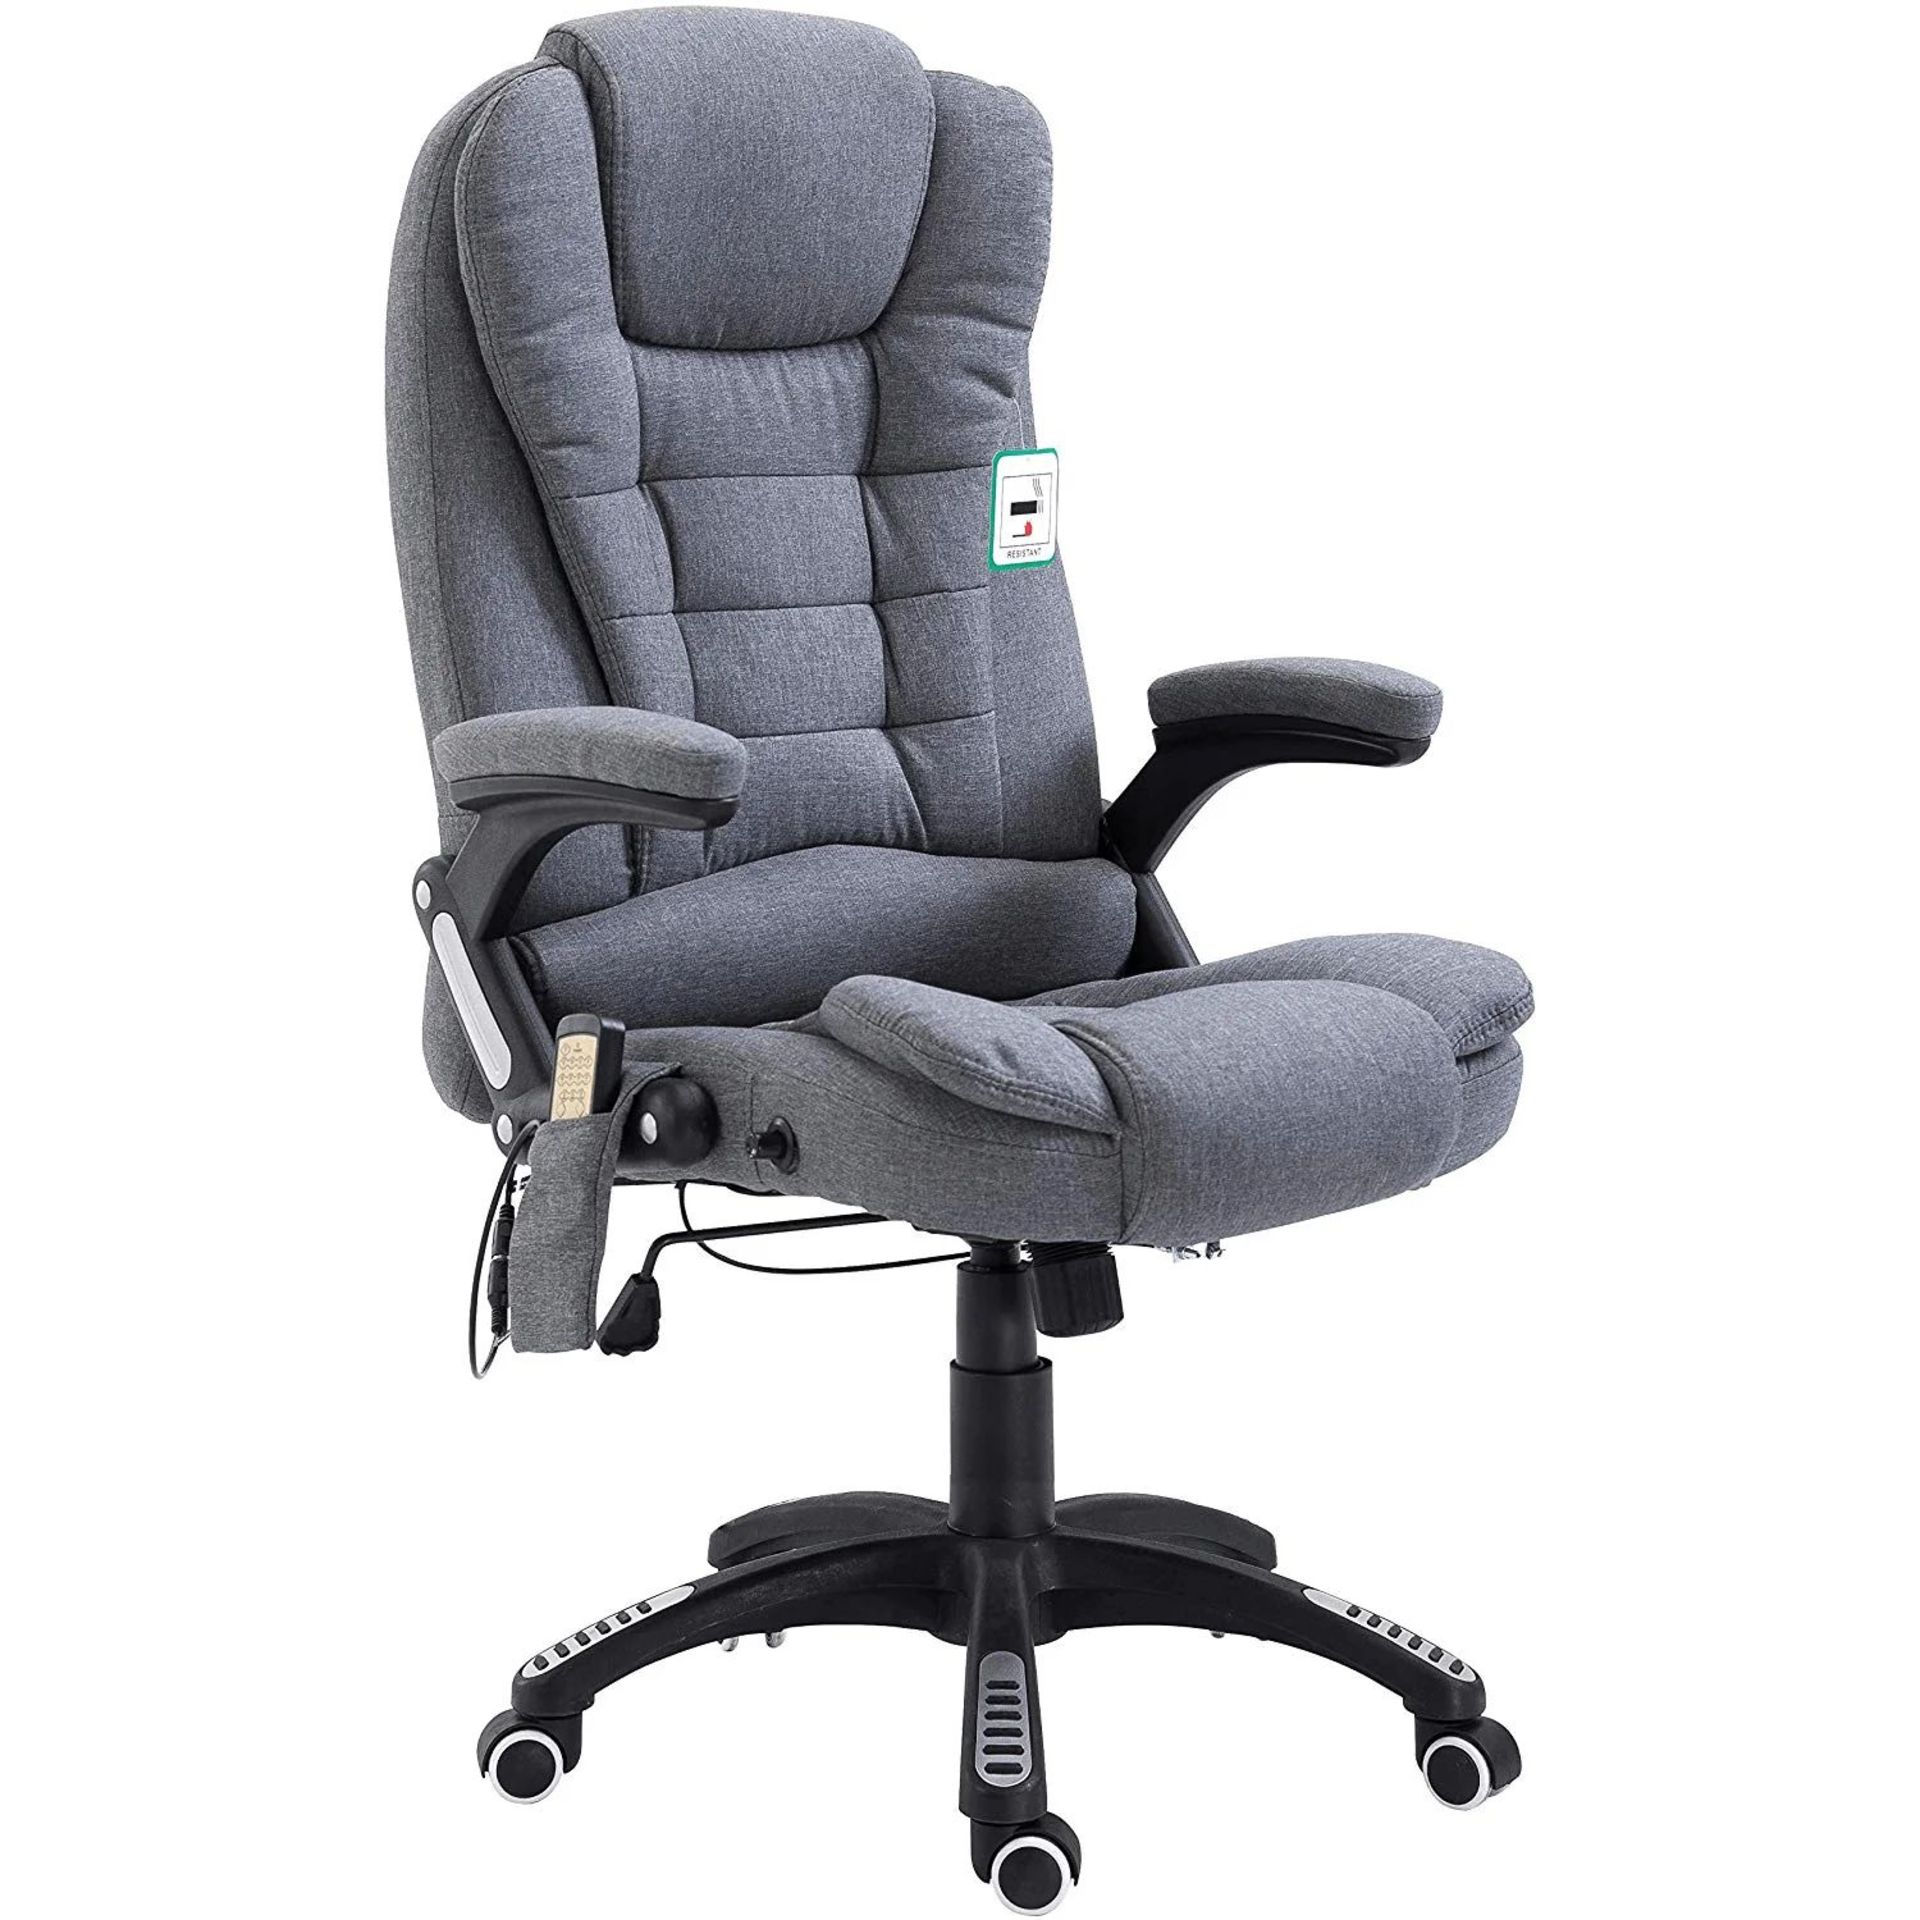 Executive Recline Padded Swivel Office Chair with Vibrating Massage Function, MM17 Grey Fabric. -